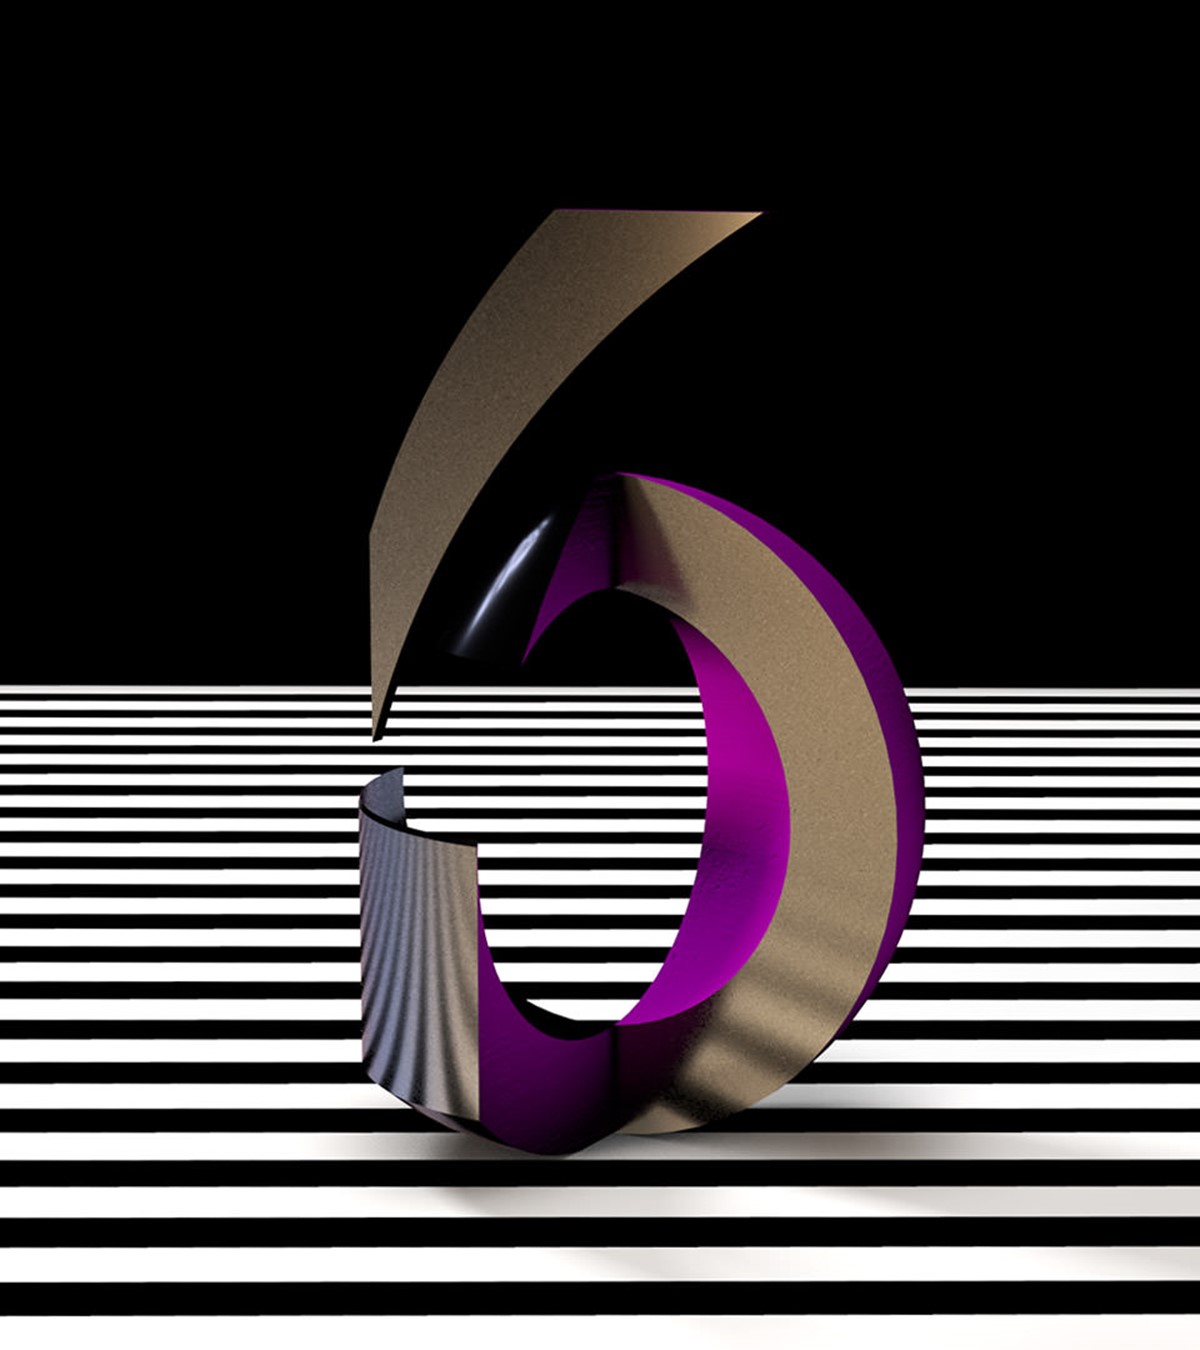 Klaws. Experimental bespoke numerals. 3D number 6. Typography design by Superfried.